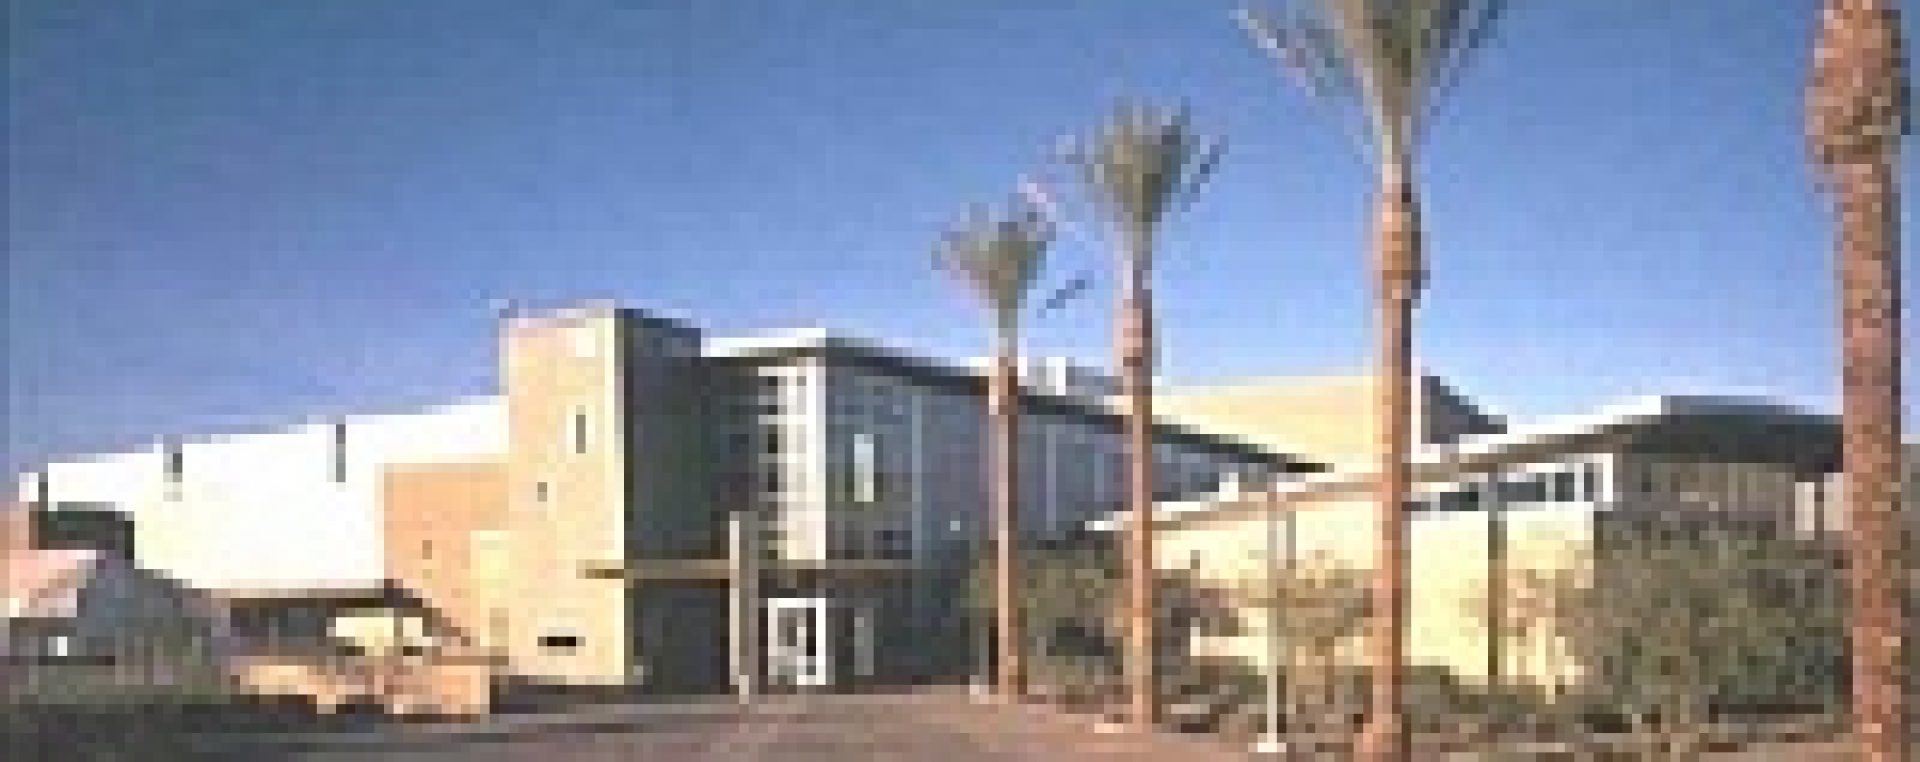 A building with palm trees in front of it, constructed by MKB Construction Services.